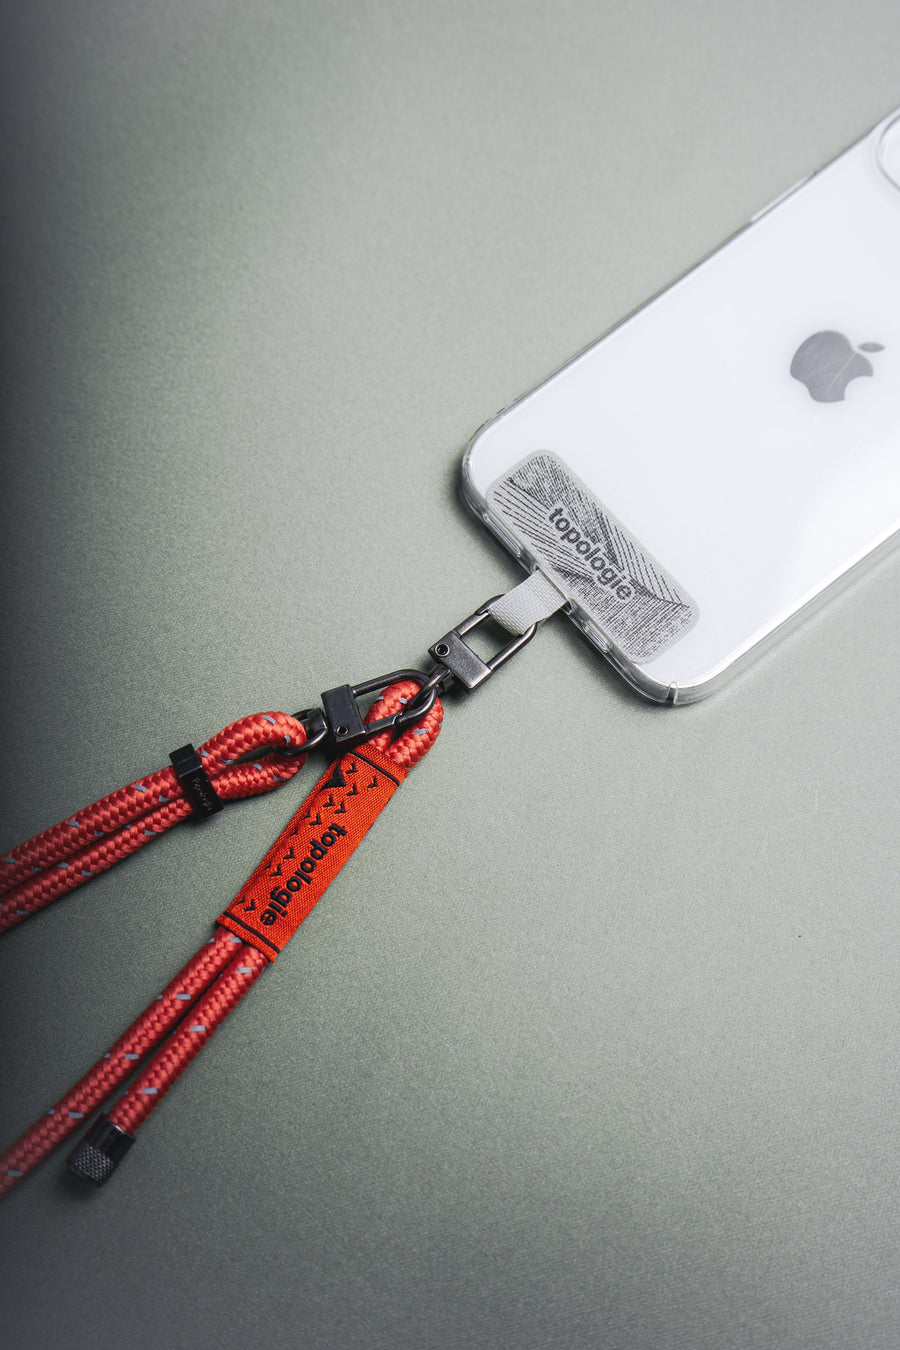 6.0mm Rope / Slate Reflective + Phone Strap Adapter